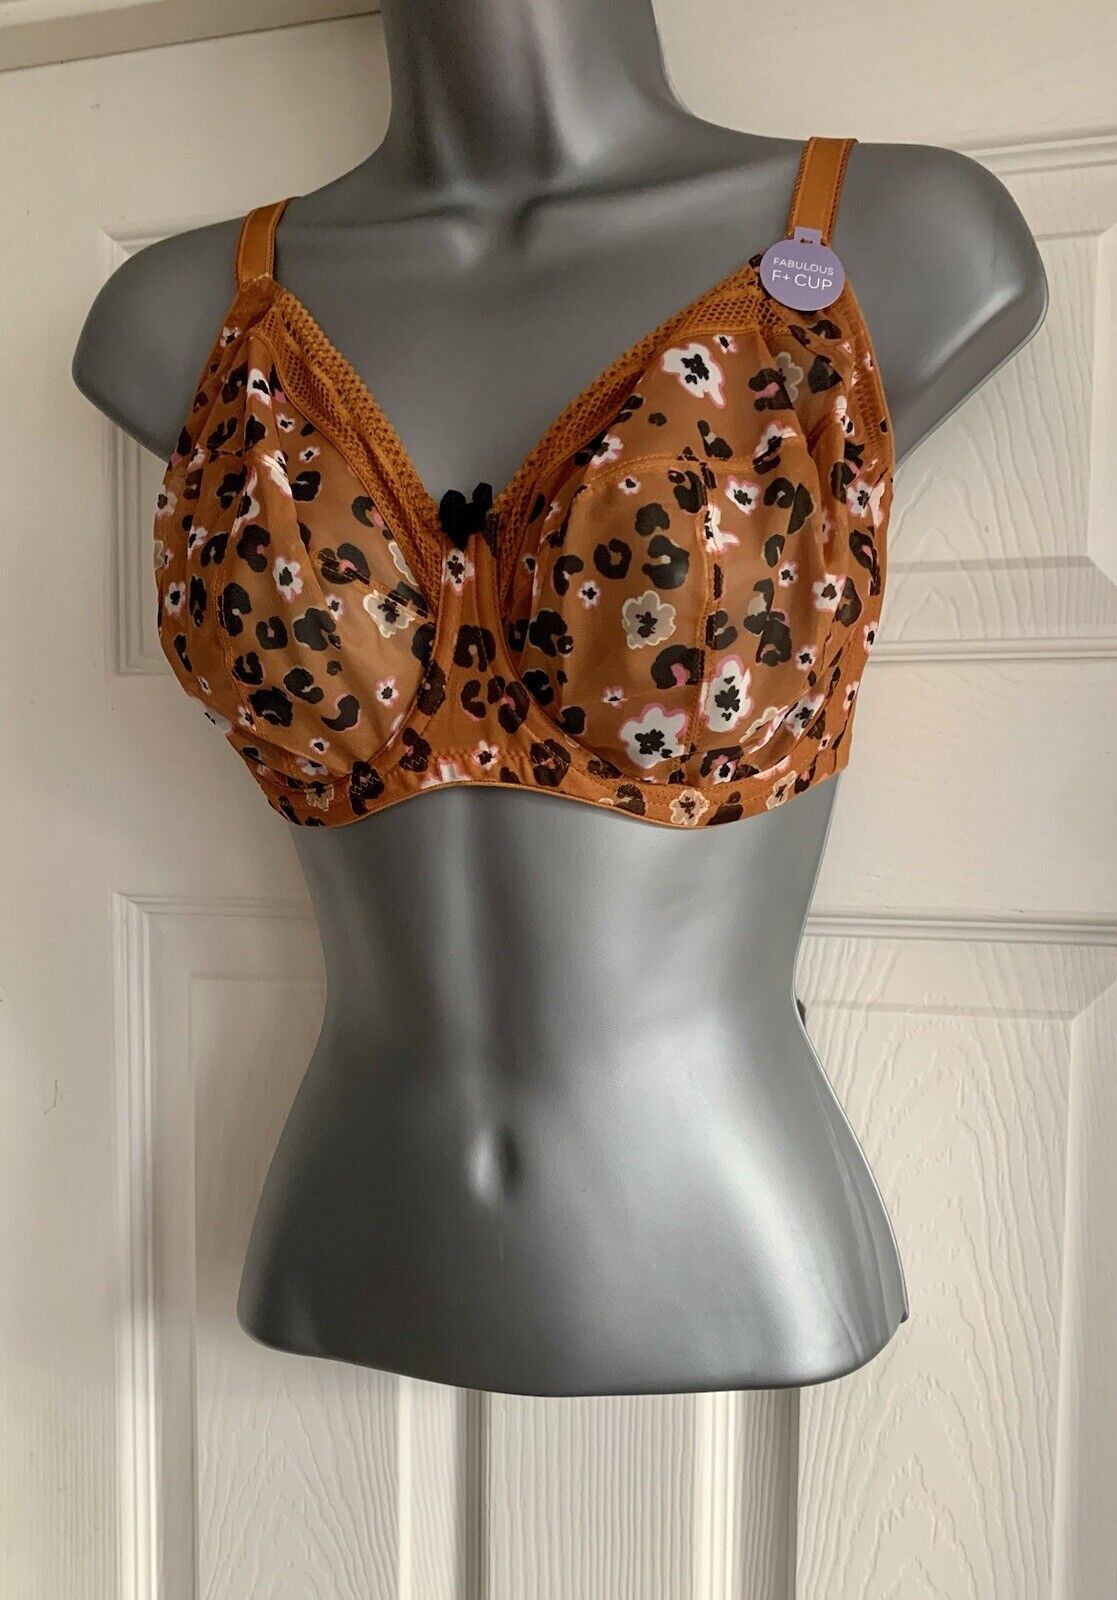 EX M*S Ginger Printed Mesh Underwired Max Support Bra Sizes 32G, 32GG, 32H